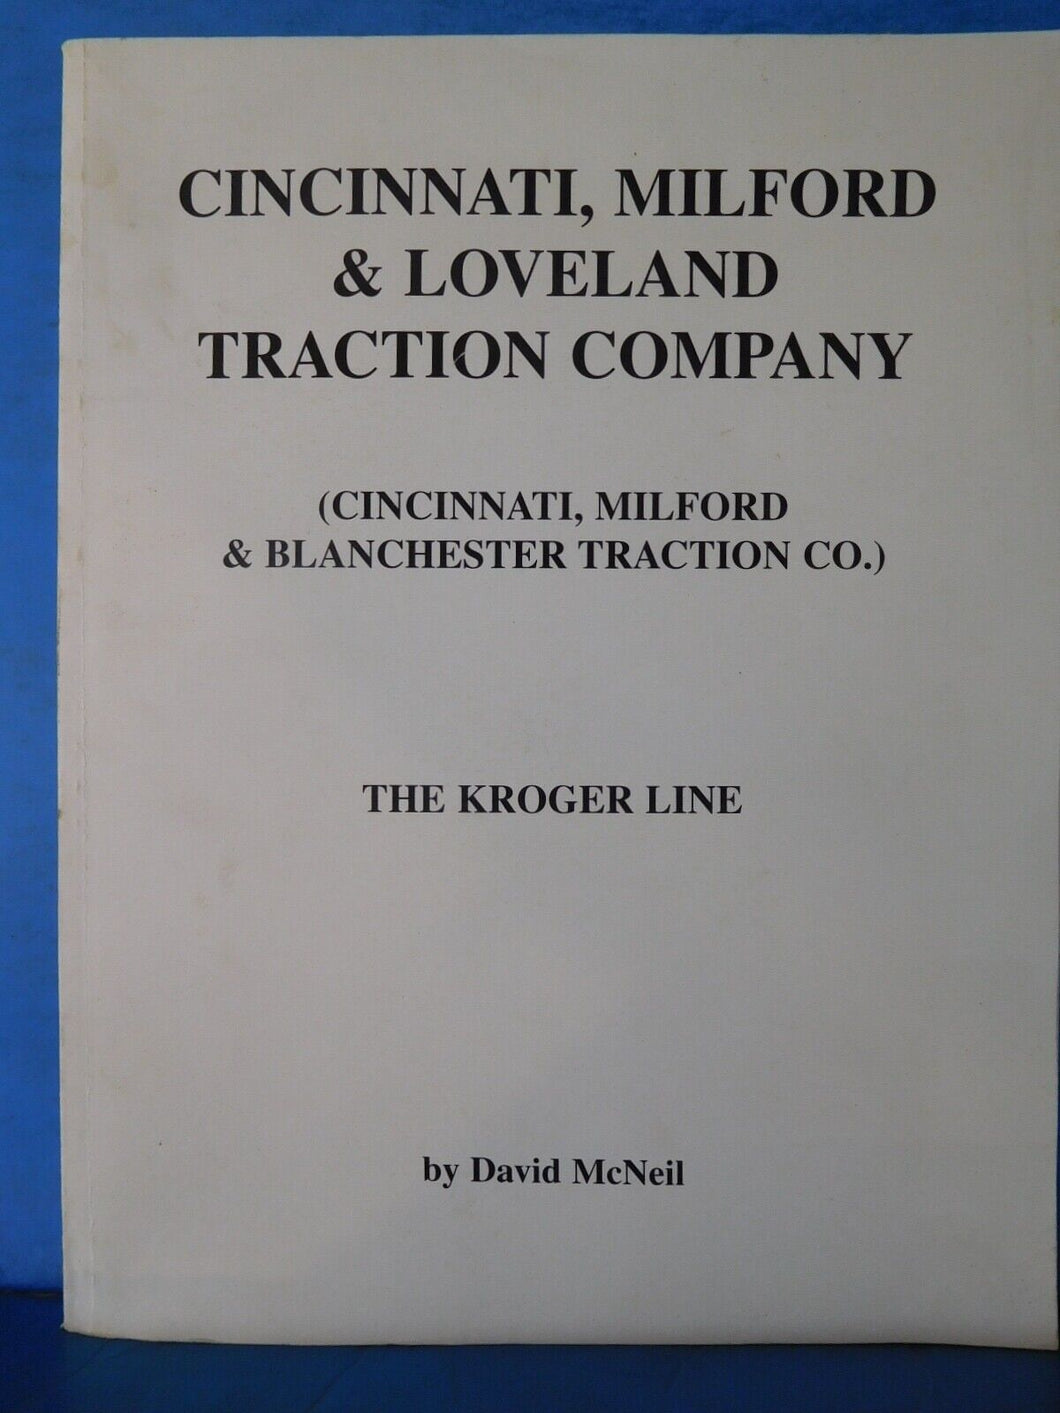 Cincinnati Milford & Loveland Traction Company by David McNeil Soft Cover